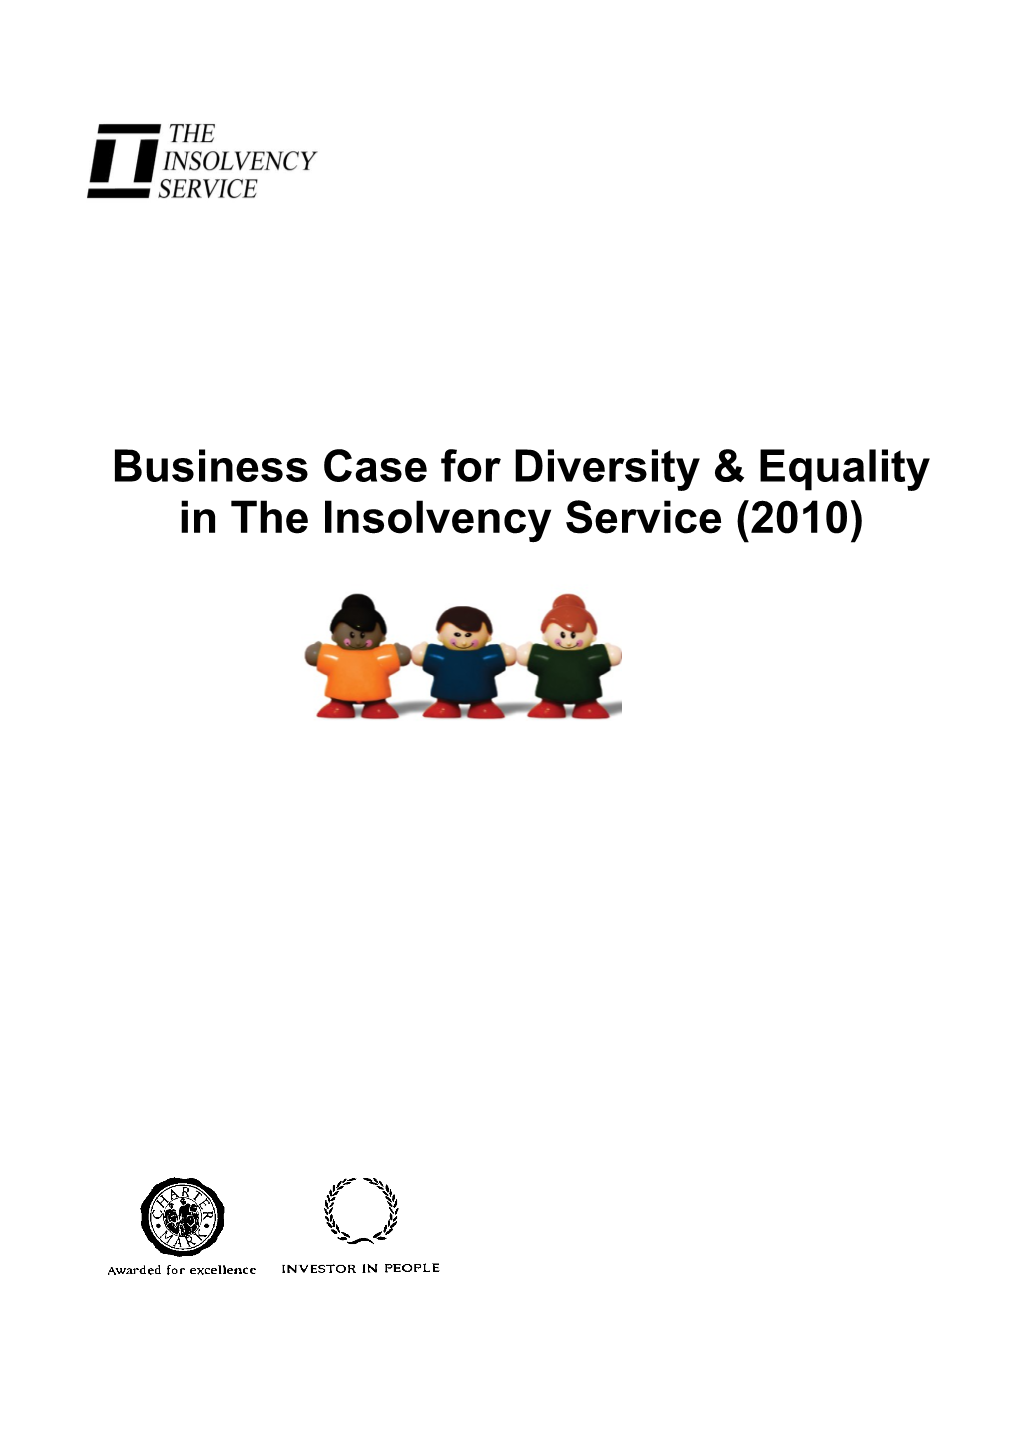 The Business Case for Diversity Is The